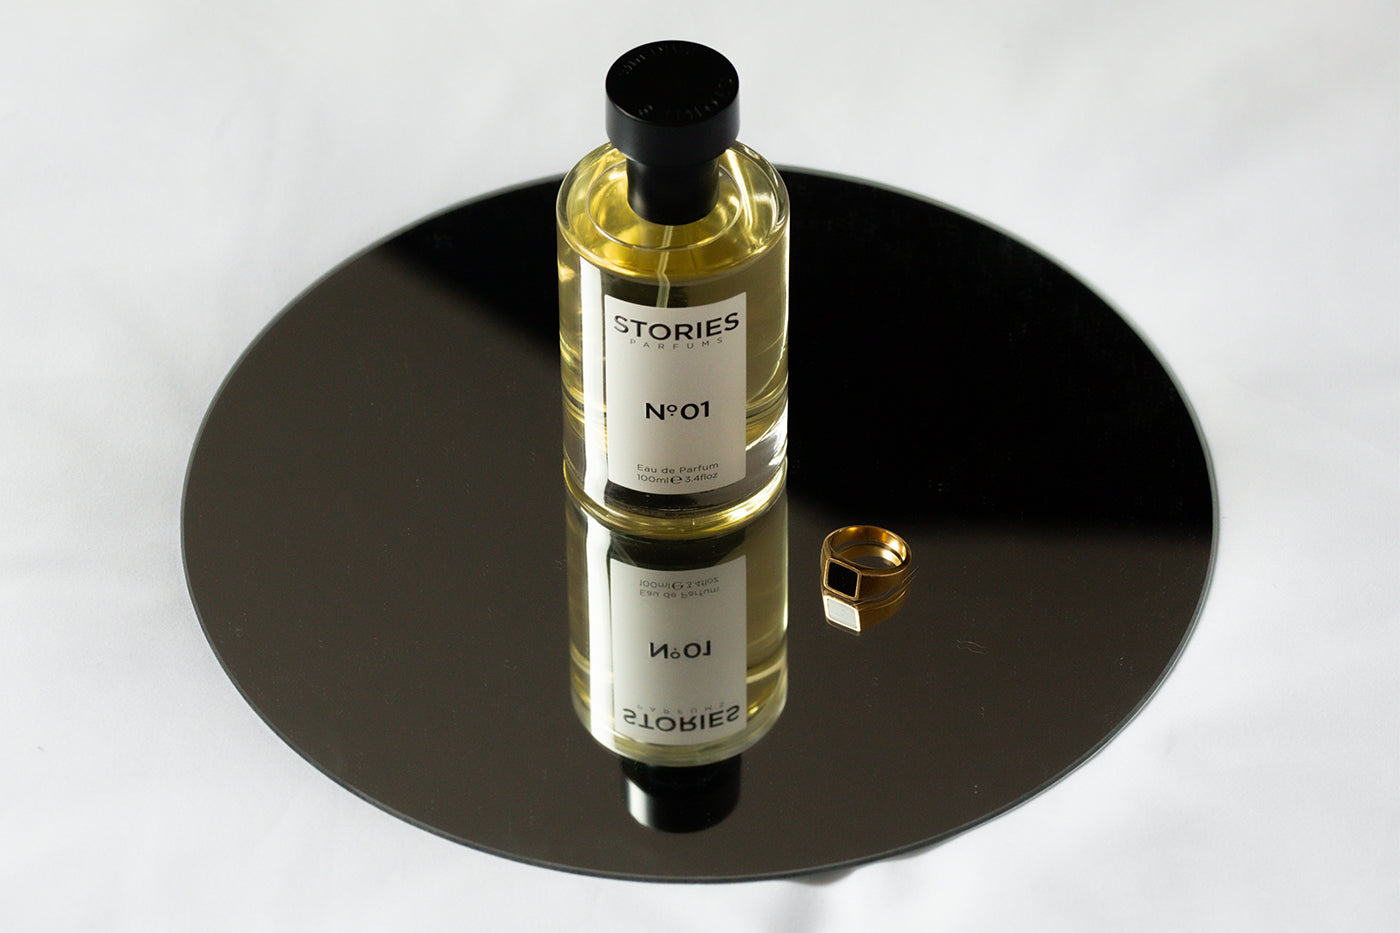 luxury perfume STORIES Parfums sat on reflective mirror surface with gold jewellary